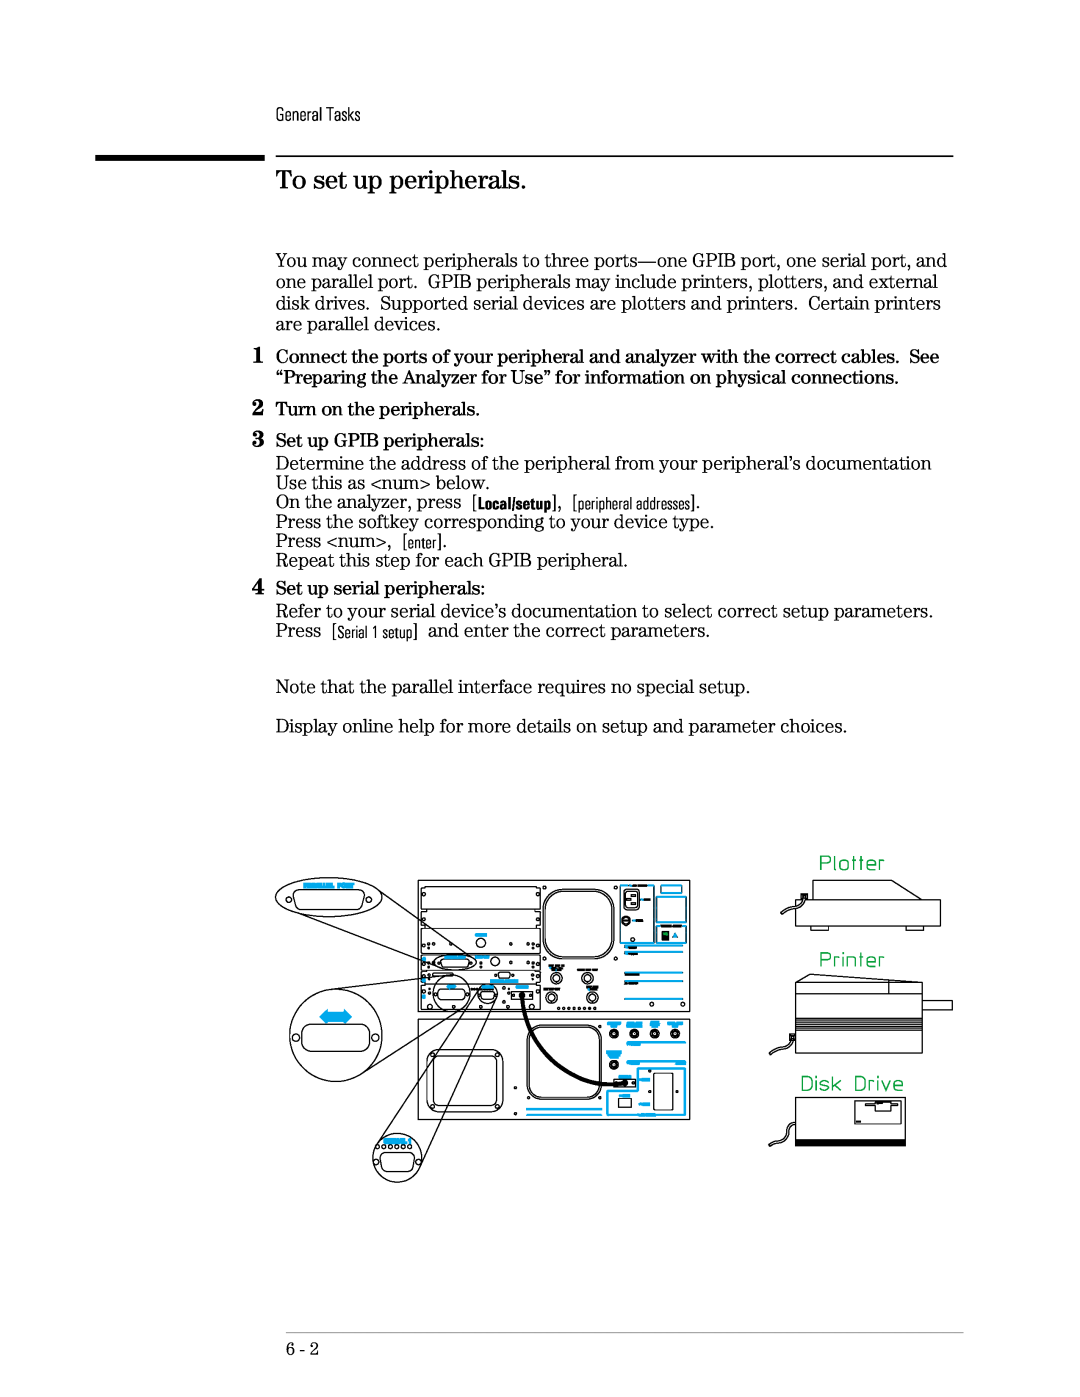 Agilent Technologies 89441A manual To set up peripherals 